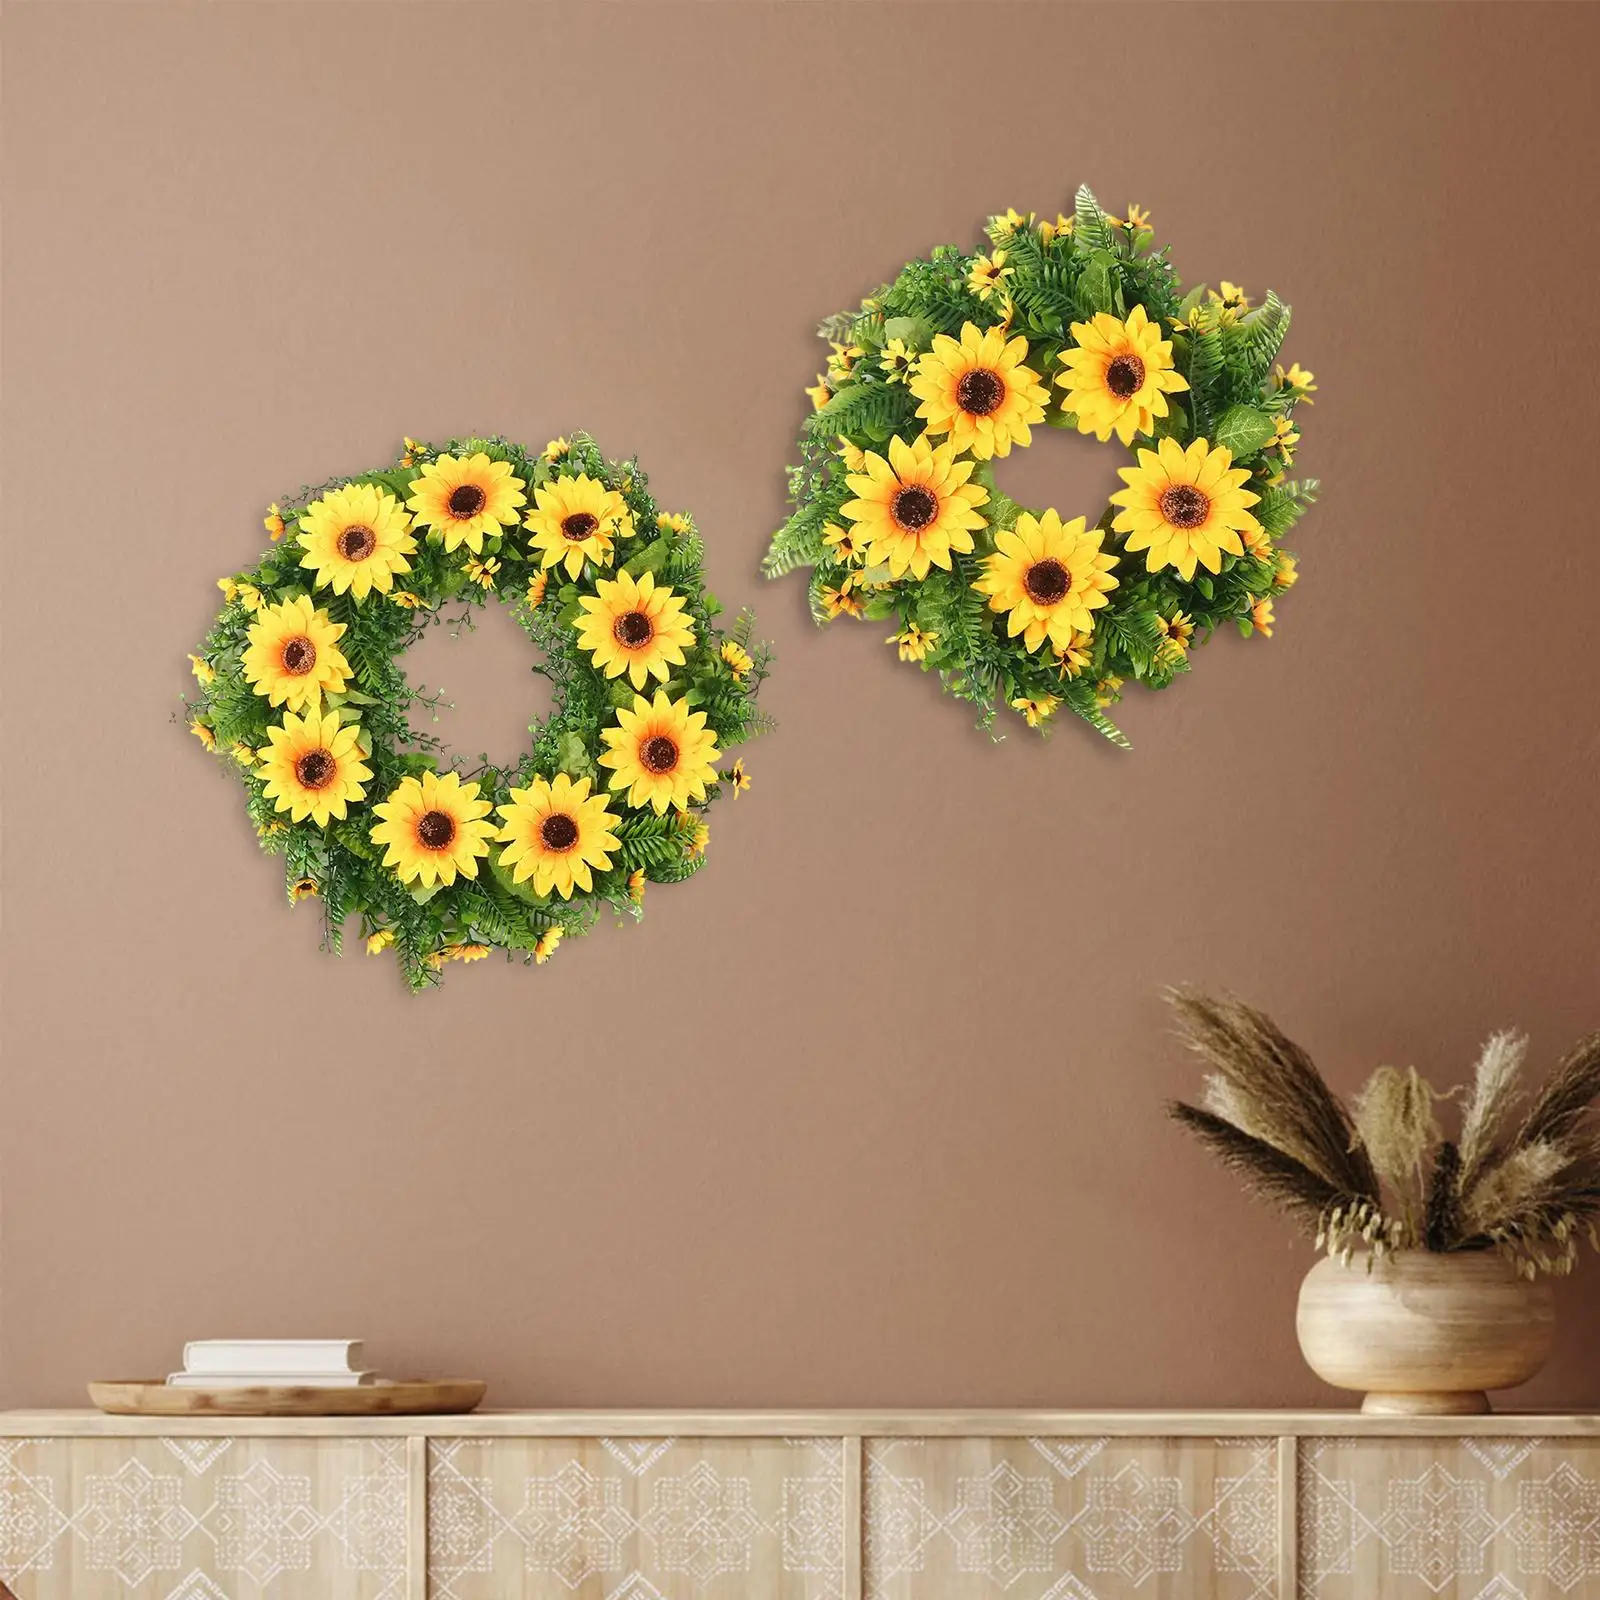 Artificial Sunflower Wreath Hanging Garland Rustic Outdoor Front Door Wreath for Home Decor Backyard Party Fireplace Farmhouse